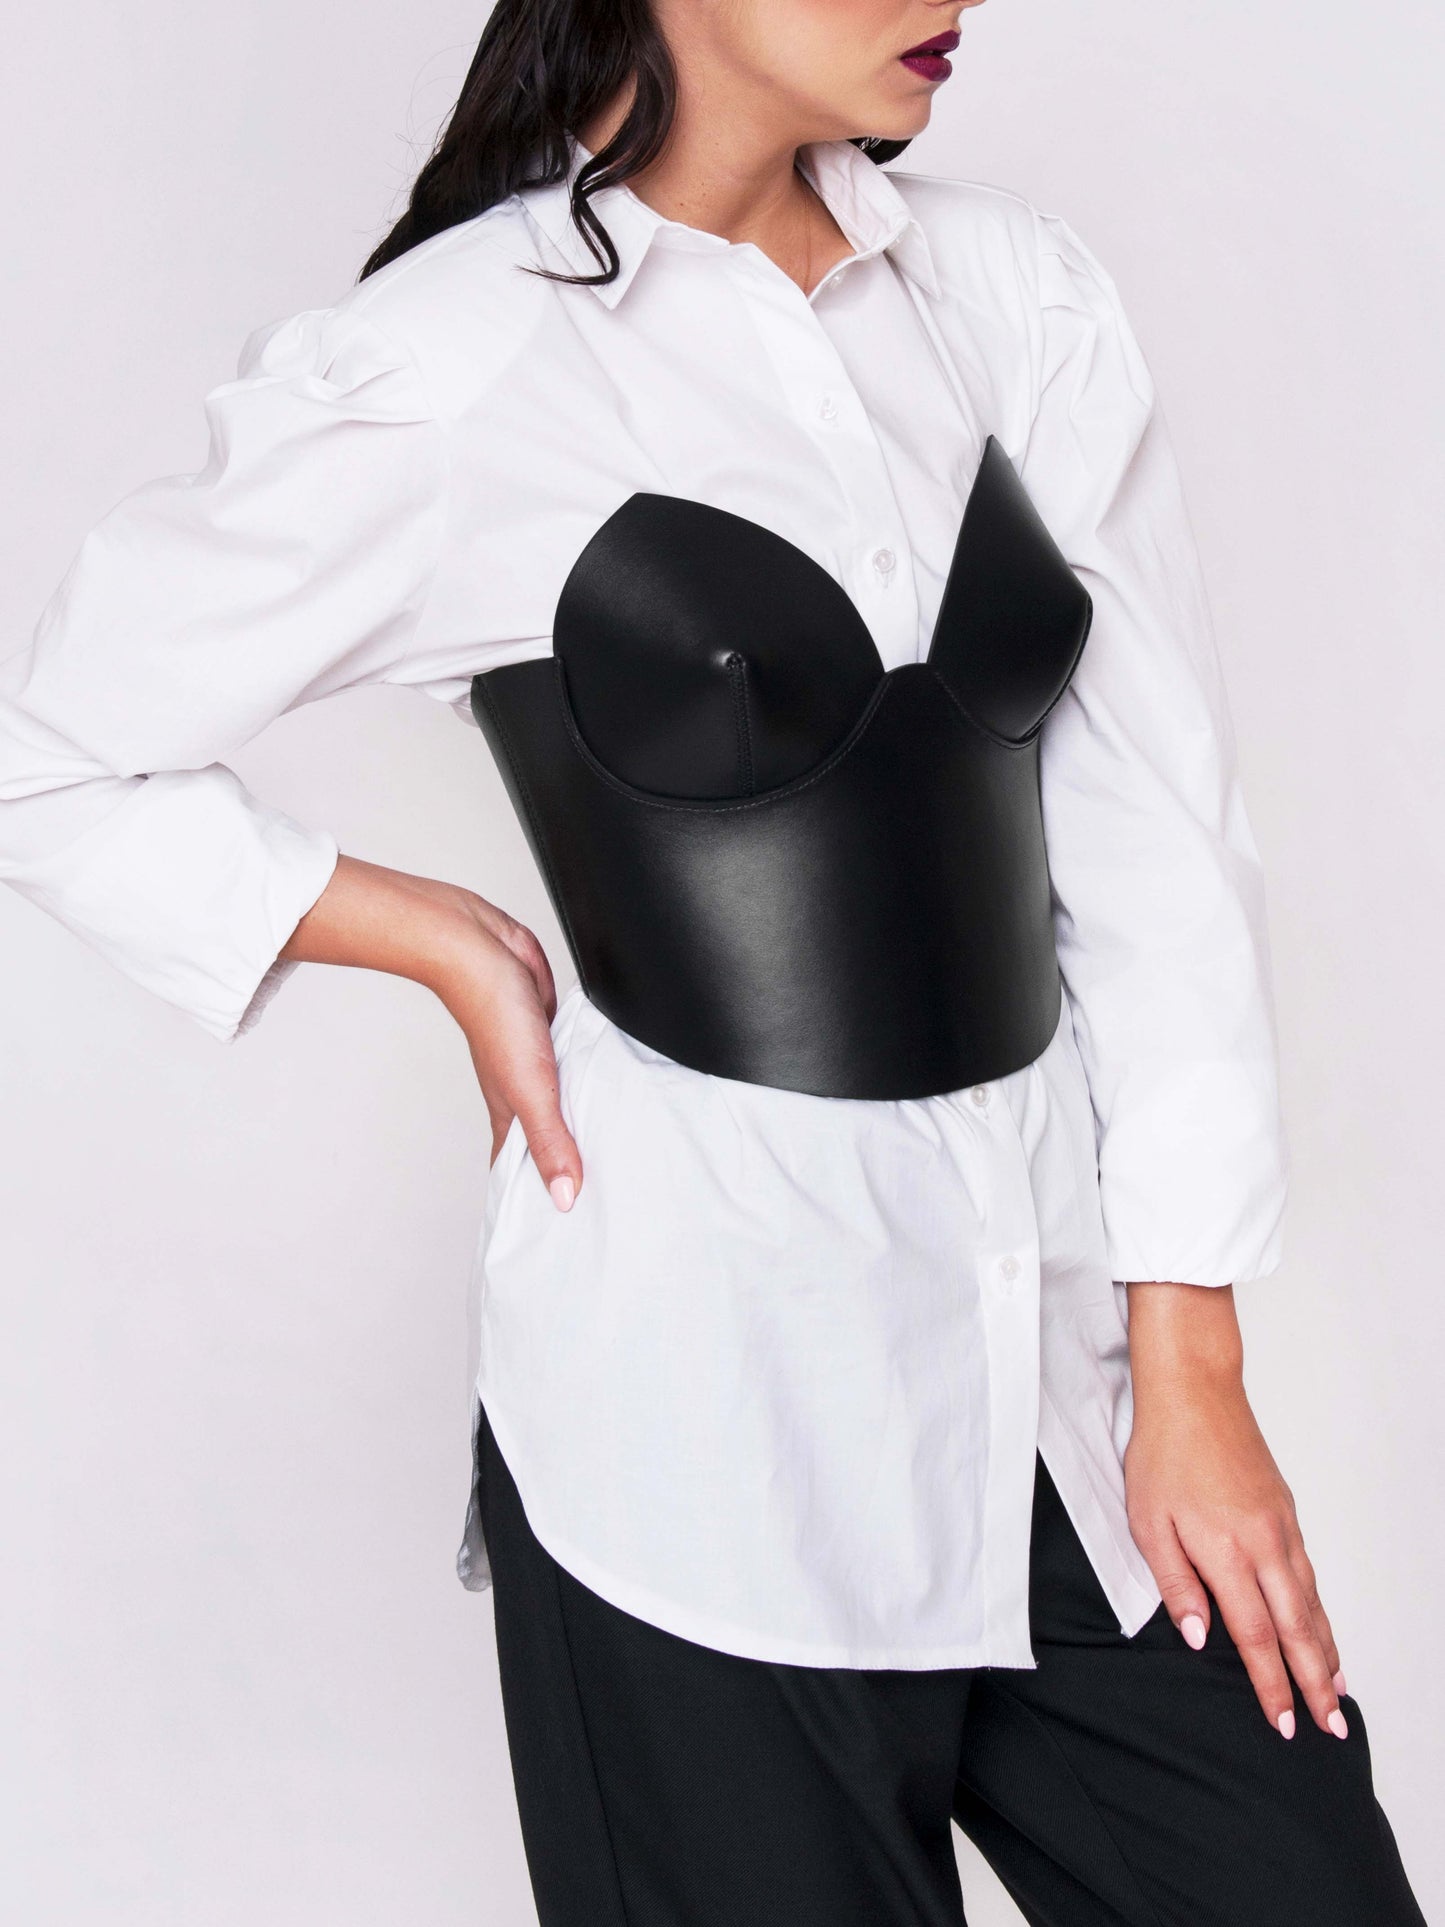 Side view of the Corset Top Black worn by woman over white shirt.